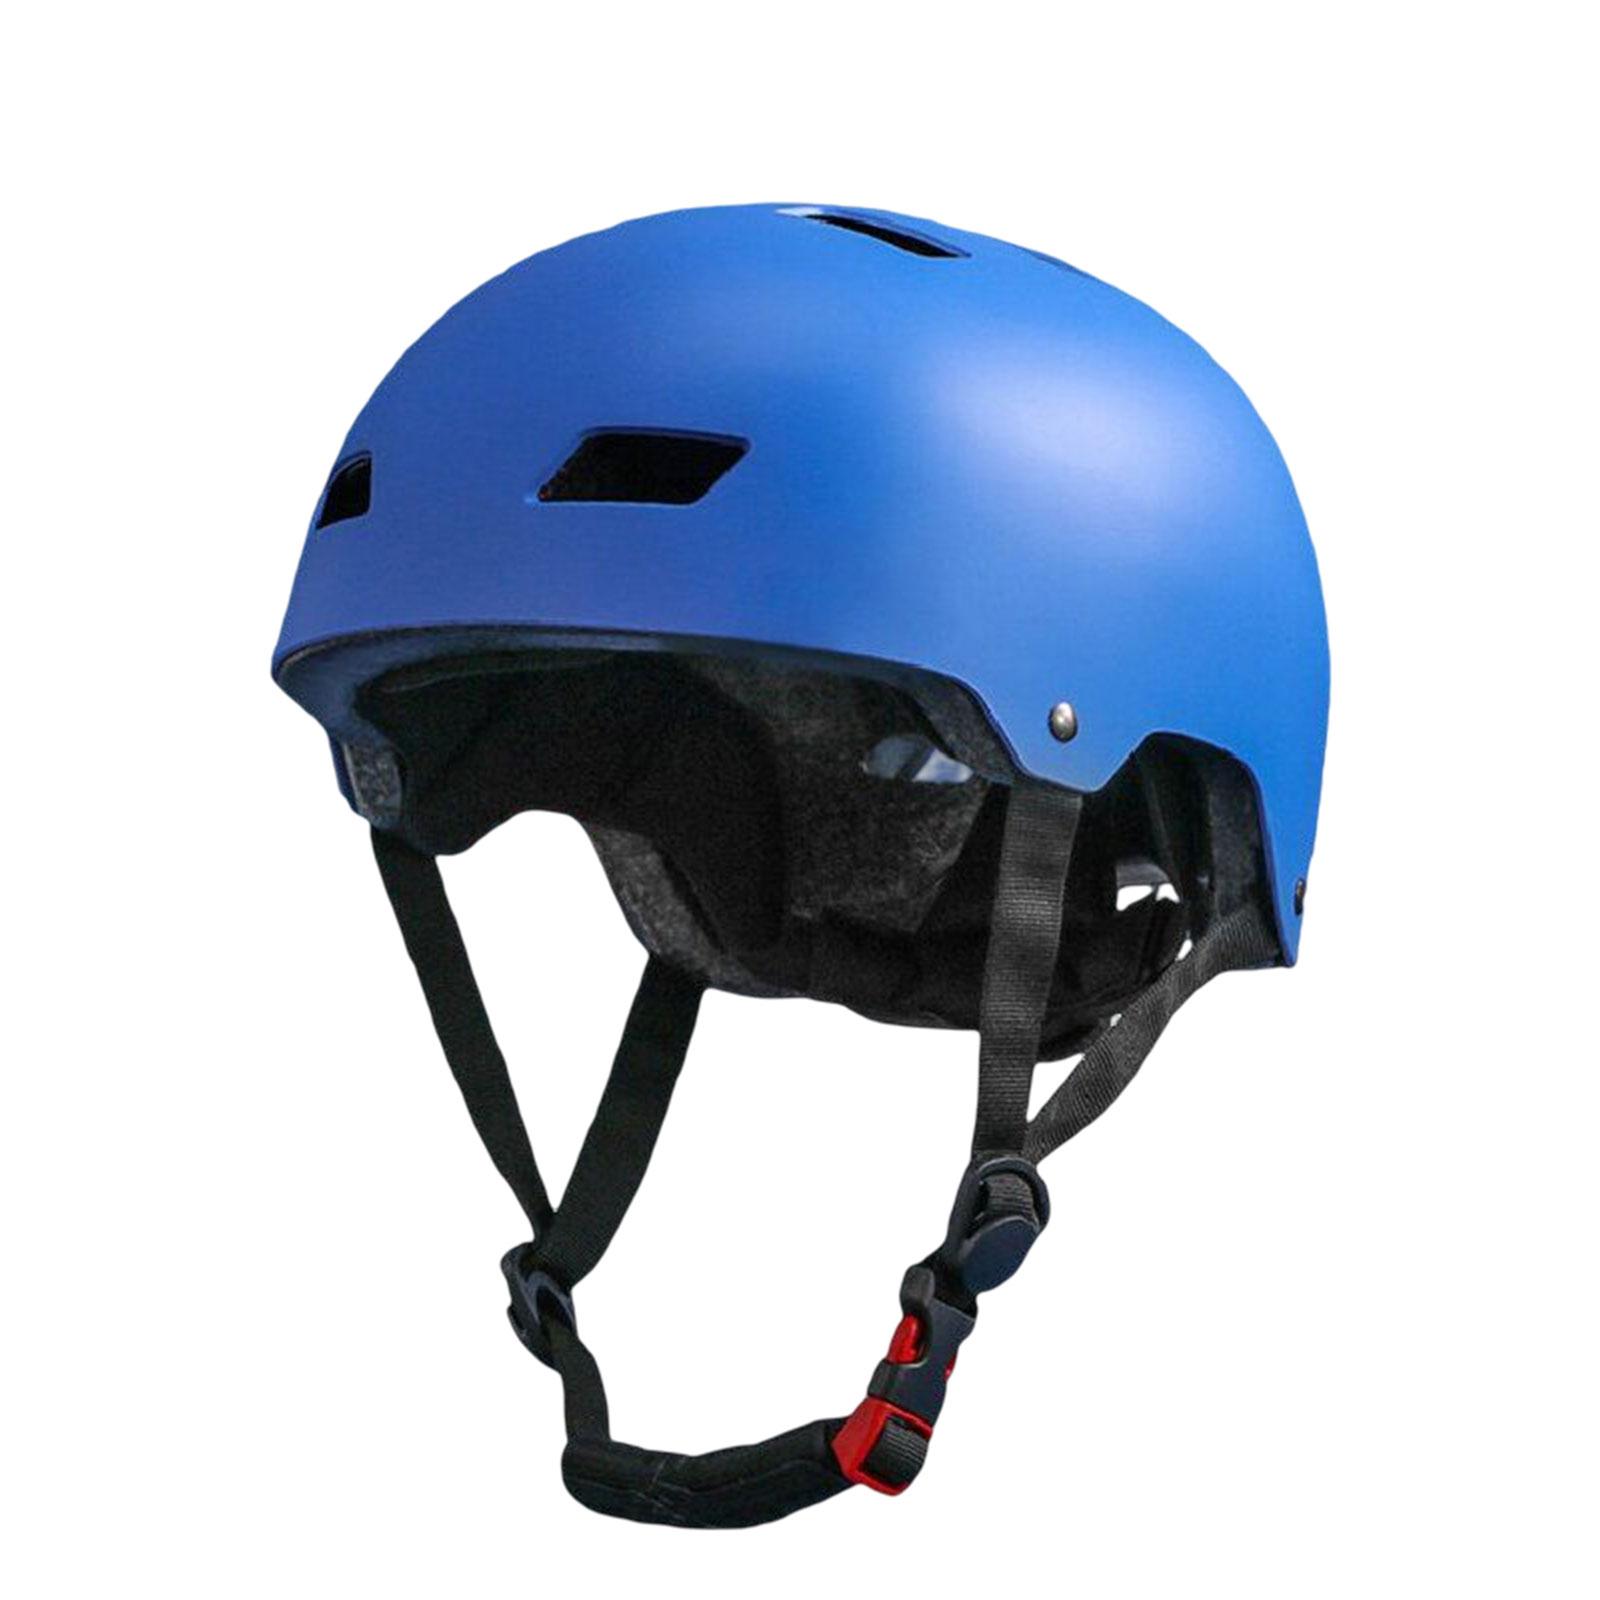 Bike Helmet Kids Portable Road Cycling Helmet for Child Youth Girls and Boys Blue